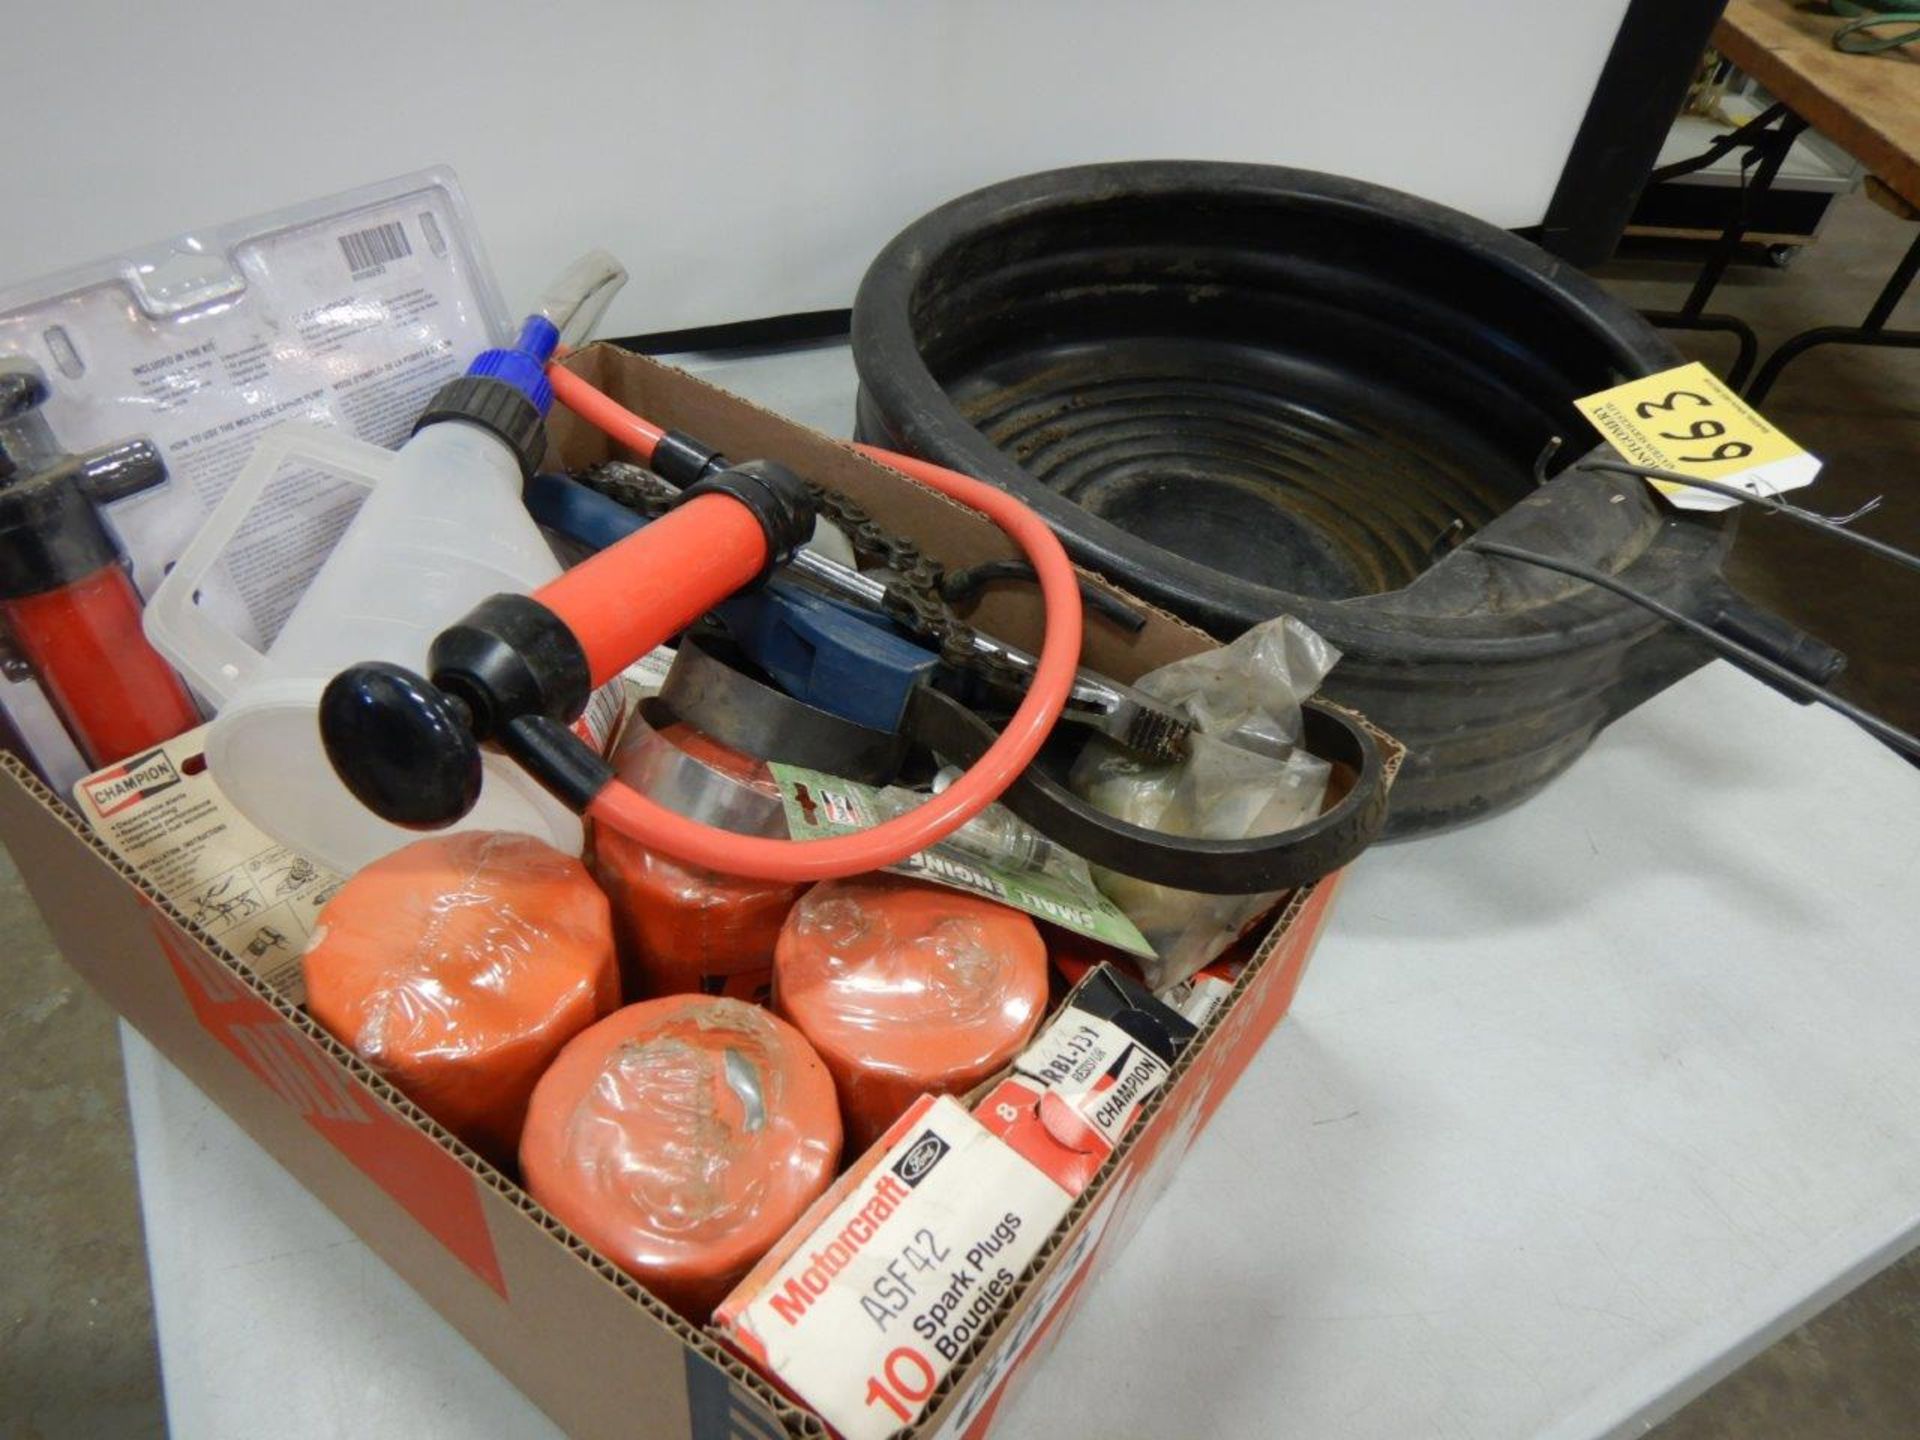 L/O ASSORTED OIL CHANGING SUPPLIES, TOOLS, OIL CATCH PANS, ETC.